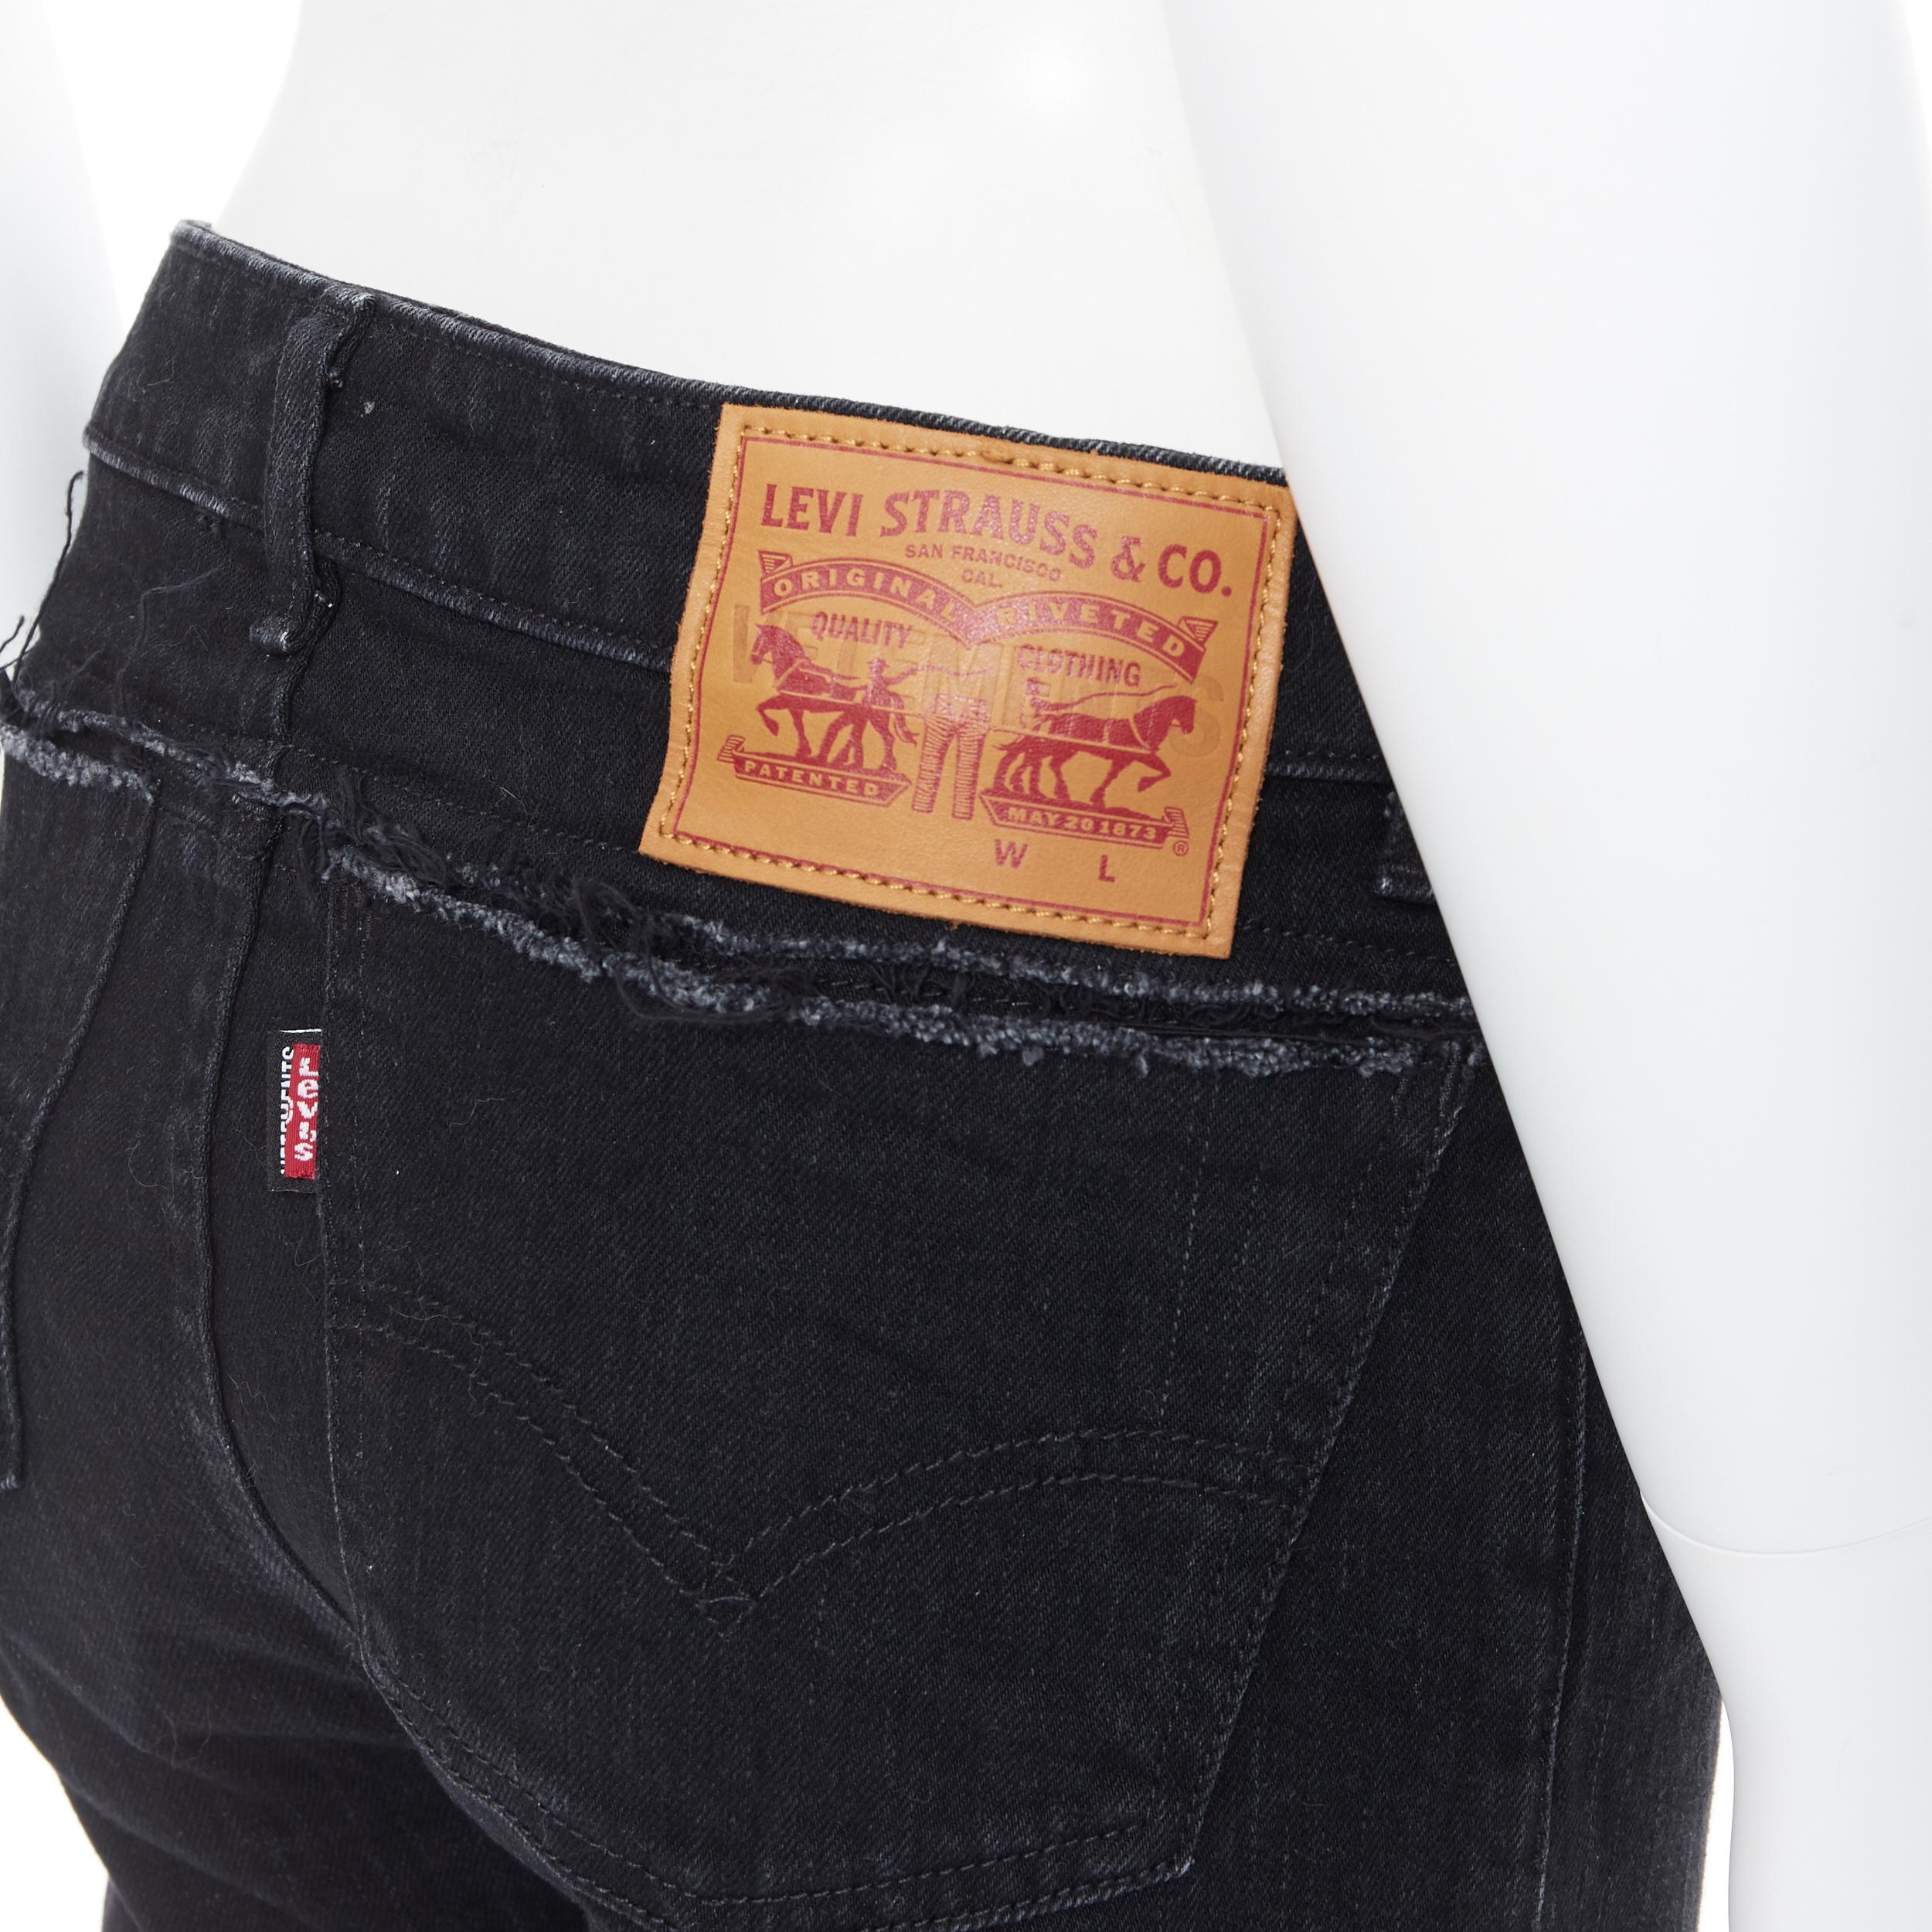 new VETEMENTS LEVI'S AW18 Demna black denim deconstructed waist jeans XS
Brand: Vetements
Designer: Levi's
Collection: AW2018
Model Name / Style: Slim jeans
Material: Cotton
Color: Black
Pattern: Solid
Closure: Button
Extra Detail: Deconstructed